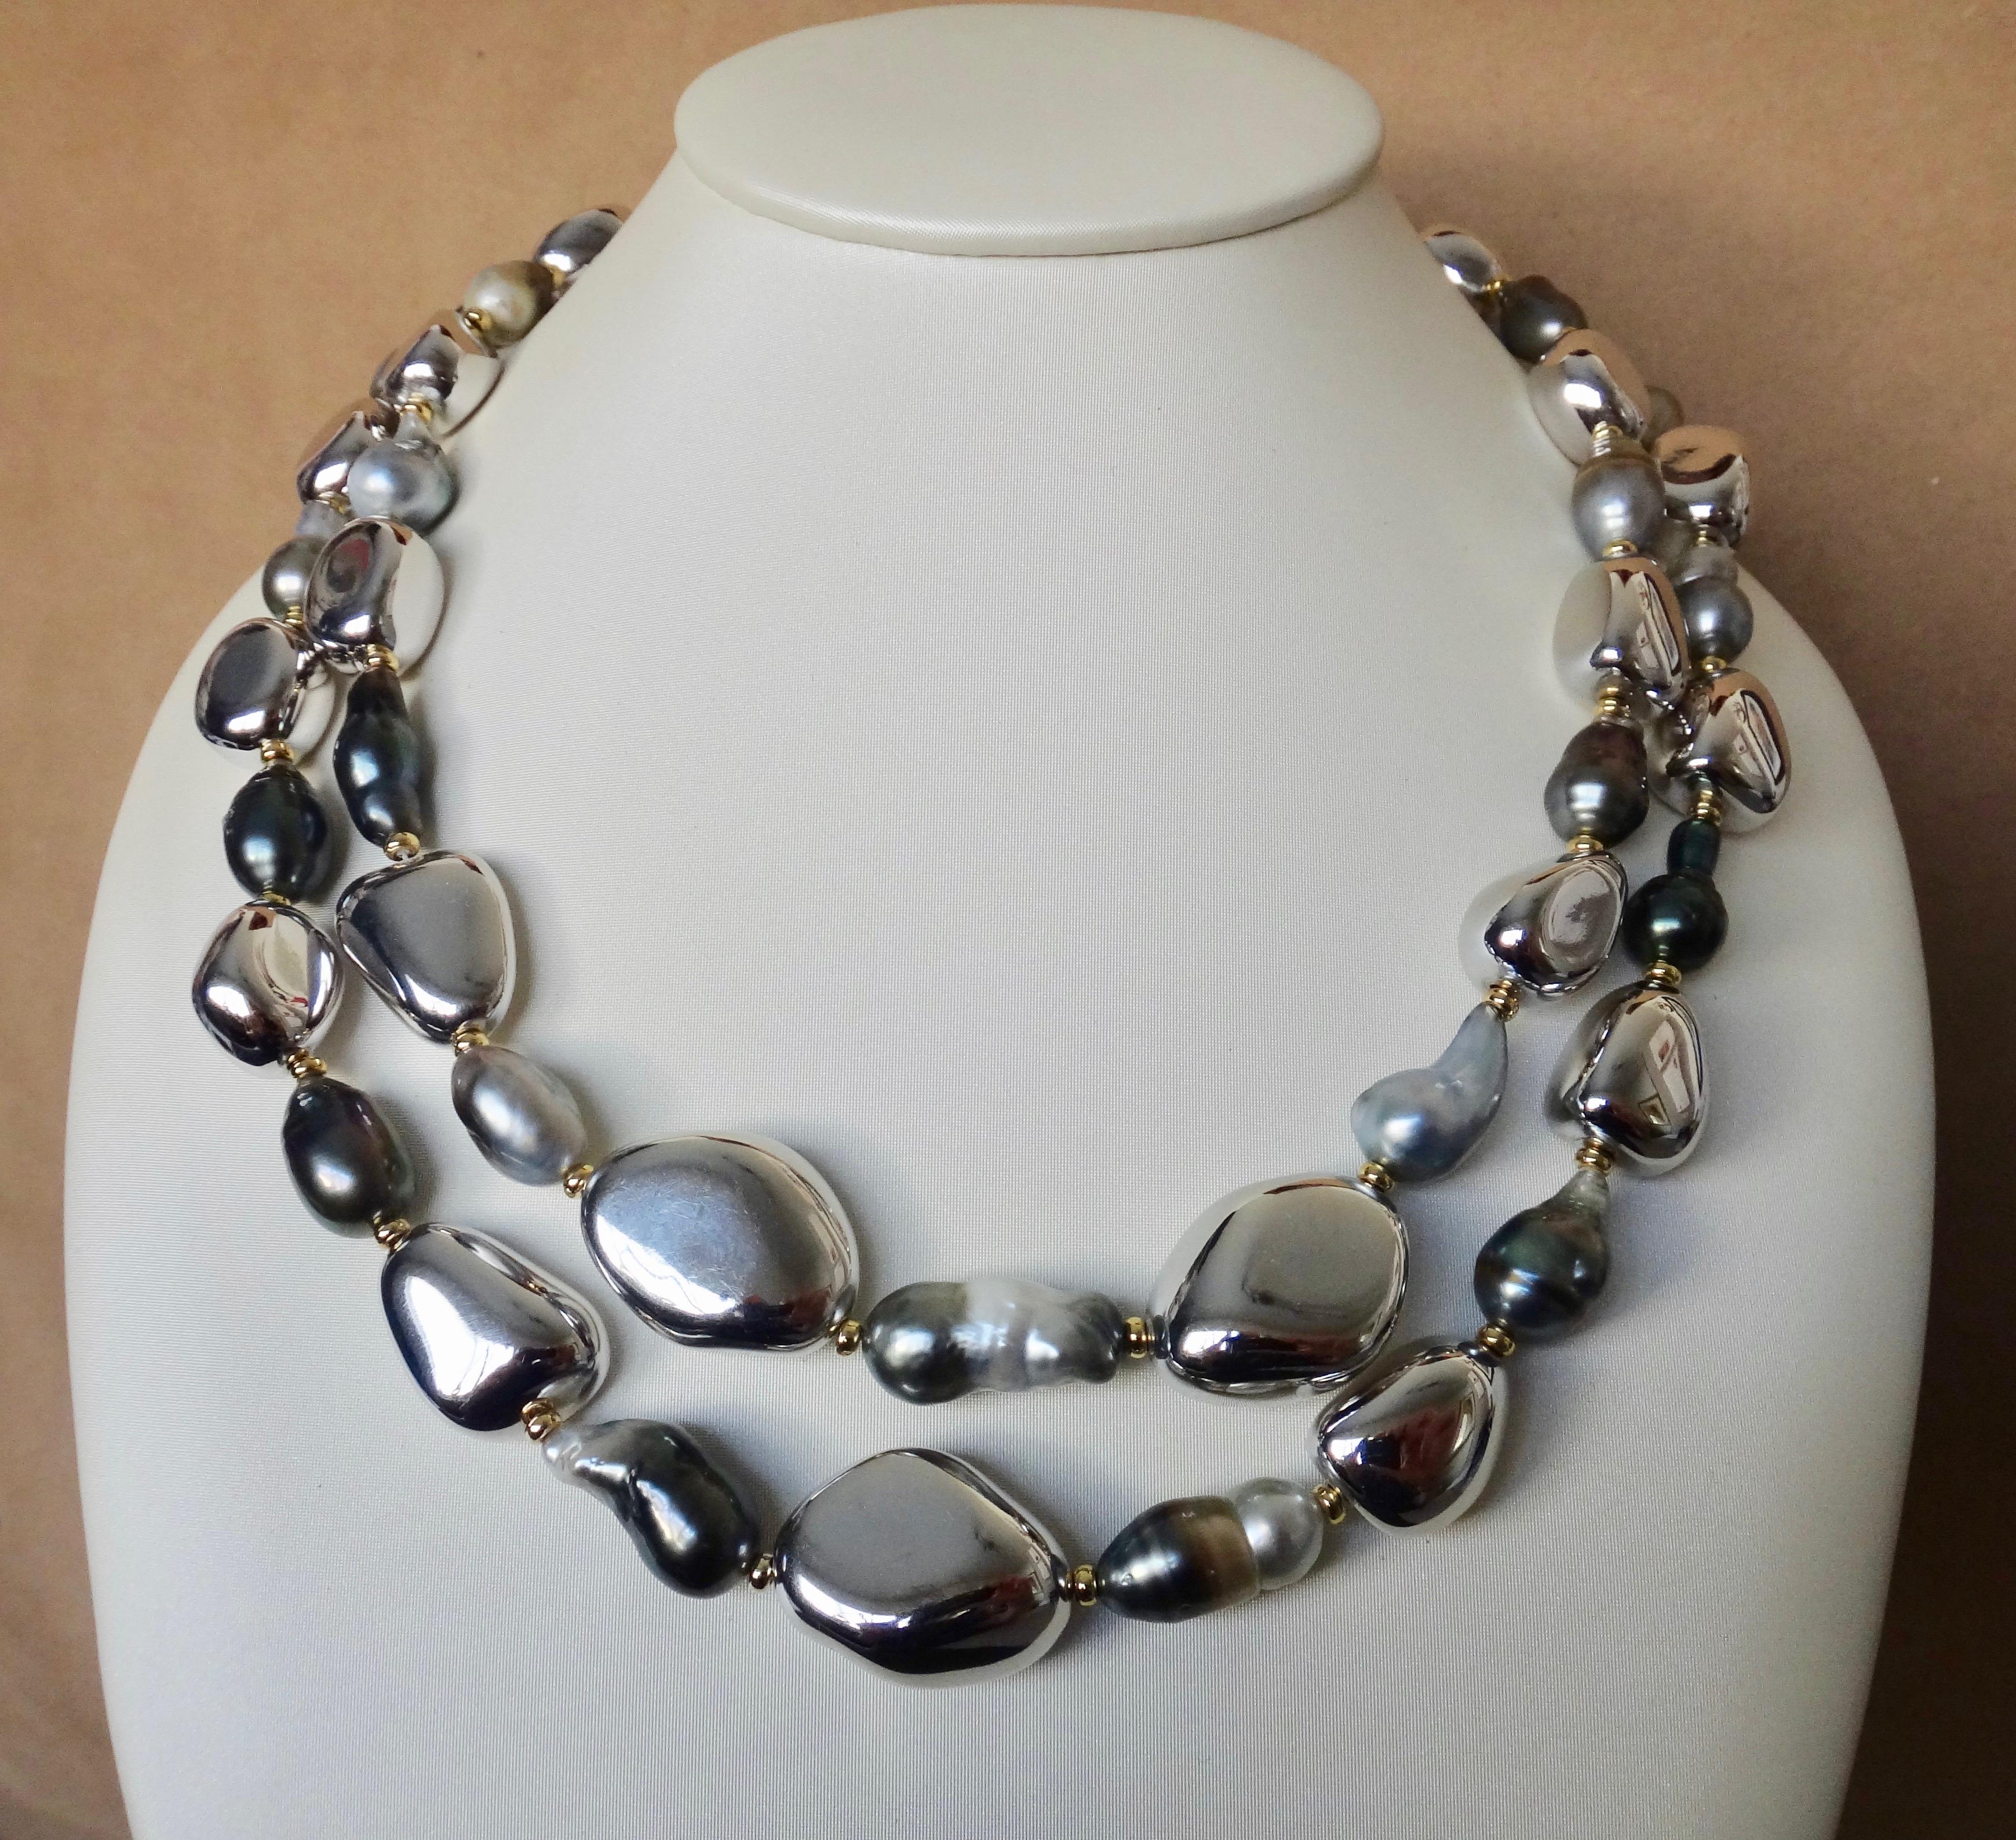 Baroque Tahitian pearls are paired with sliver pebble beads is this bold yet casual necklace.  The collection of multi-colored pearls range from nearly white to black, sometimes within the same pearl.  They possess beautiful luster.  The handmade